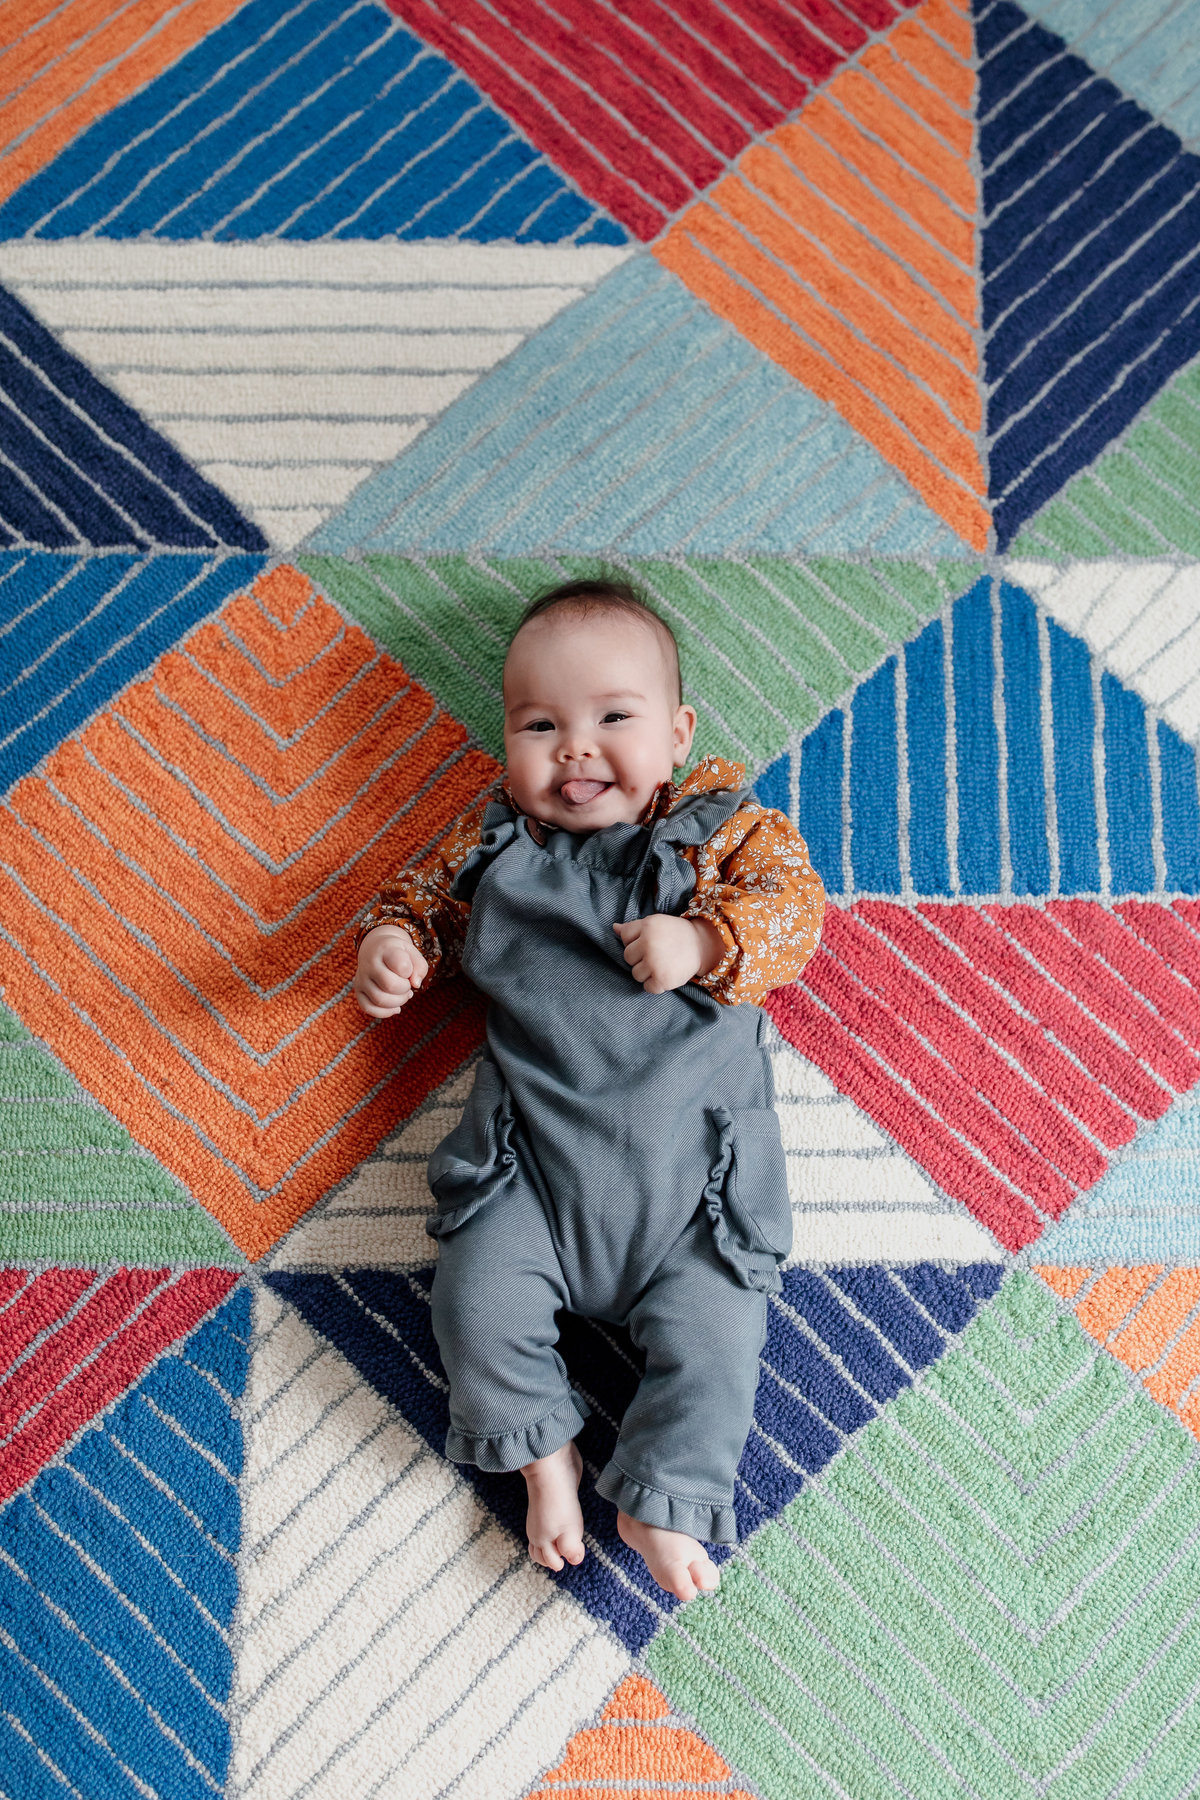 San Francisco baby portrait with colorful geometric rug as backdrop